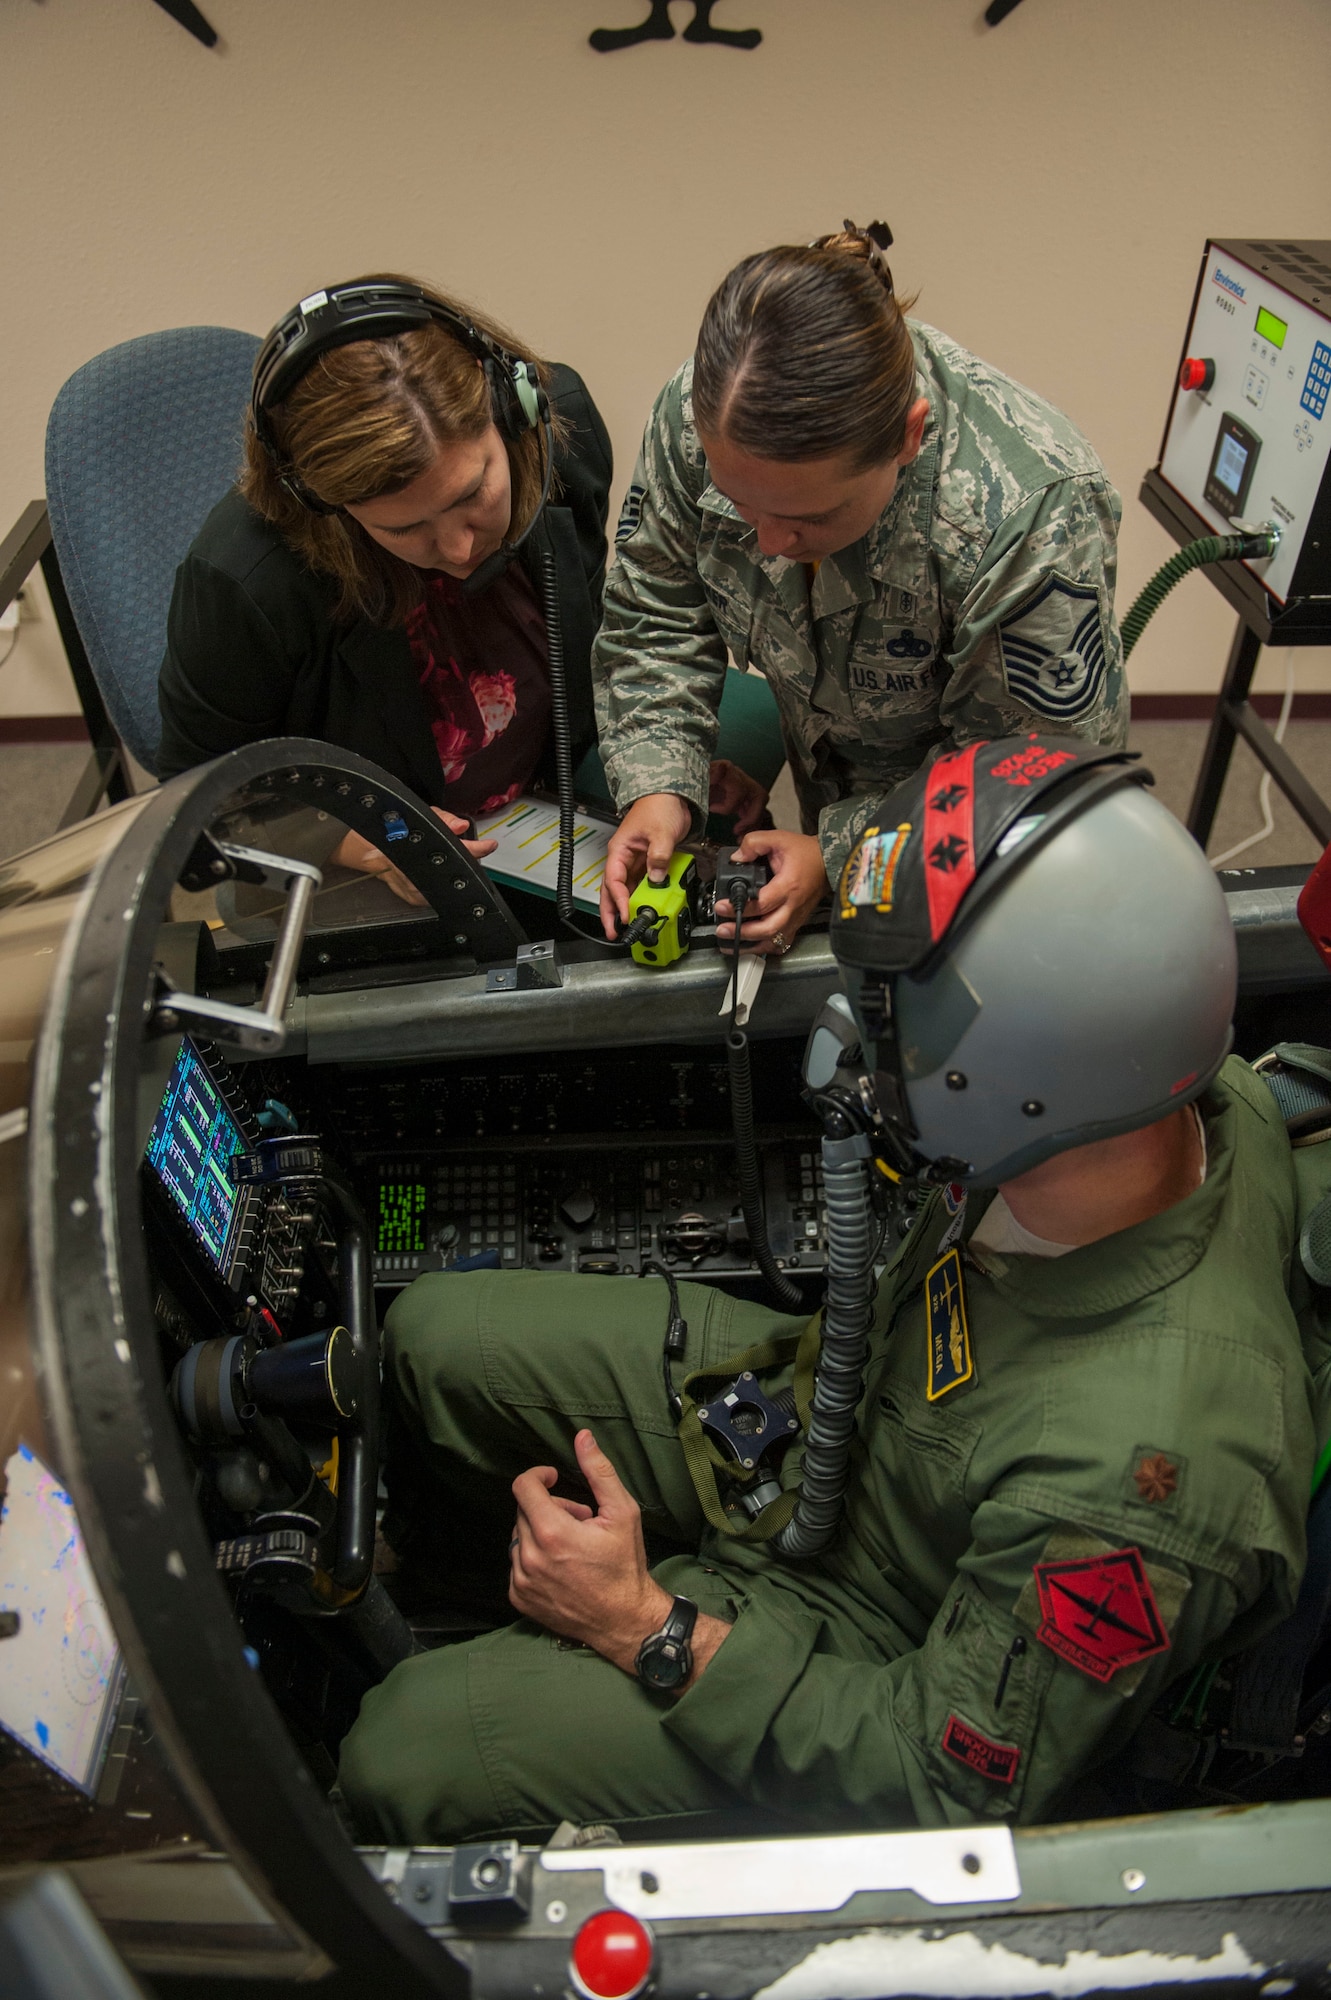 Master Sgt. Jennifer Flecker, 9th Physiological Support Squadron support flight chief, sets up the communication connection between the pilot and the rest of the support staff who will be monitoring the pilots vitals and the conditions of the simulation.